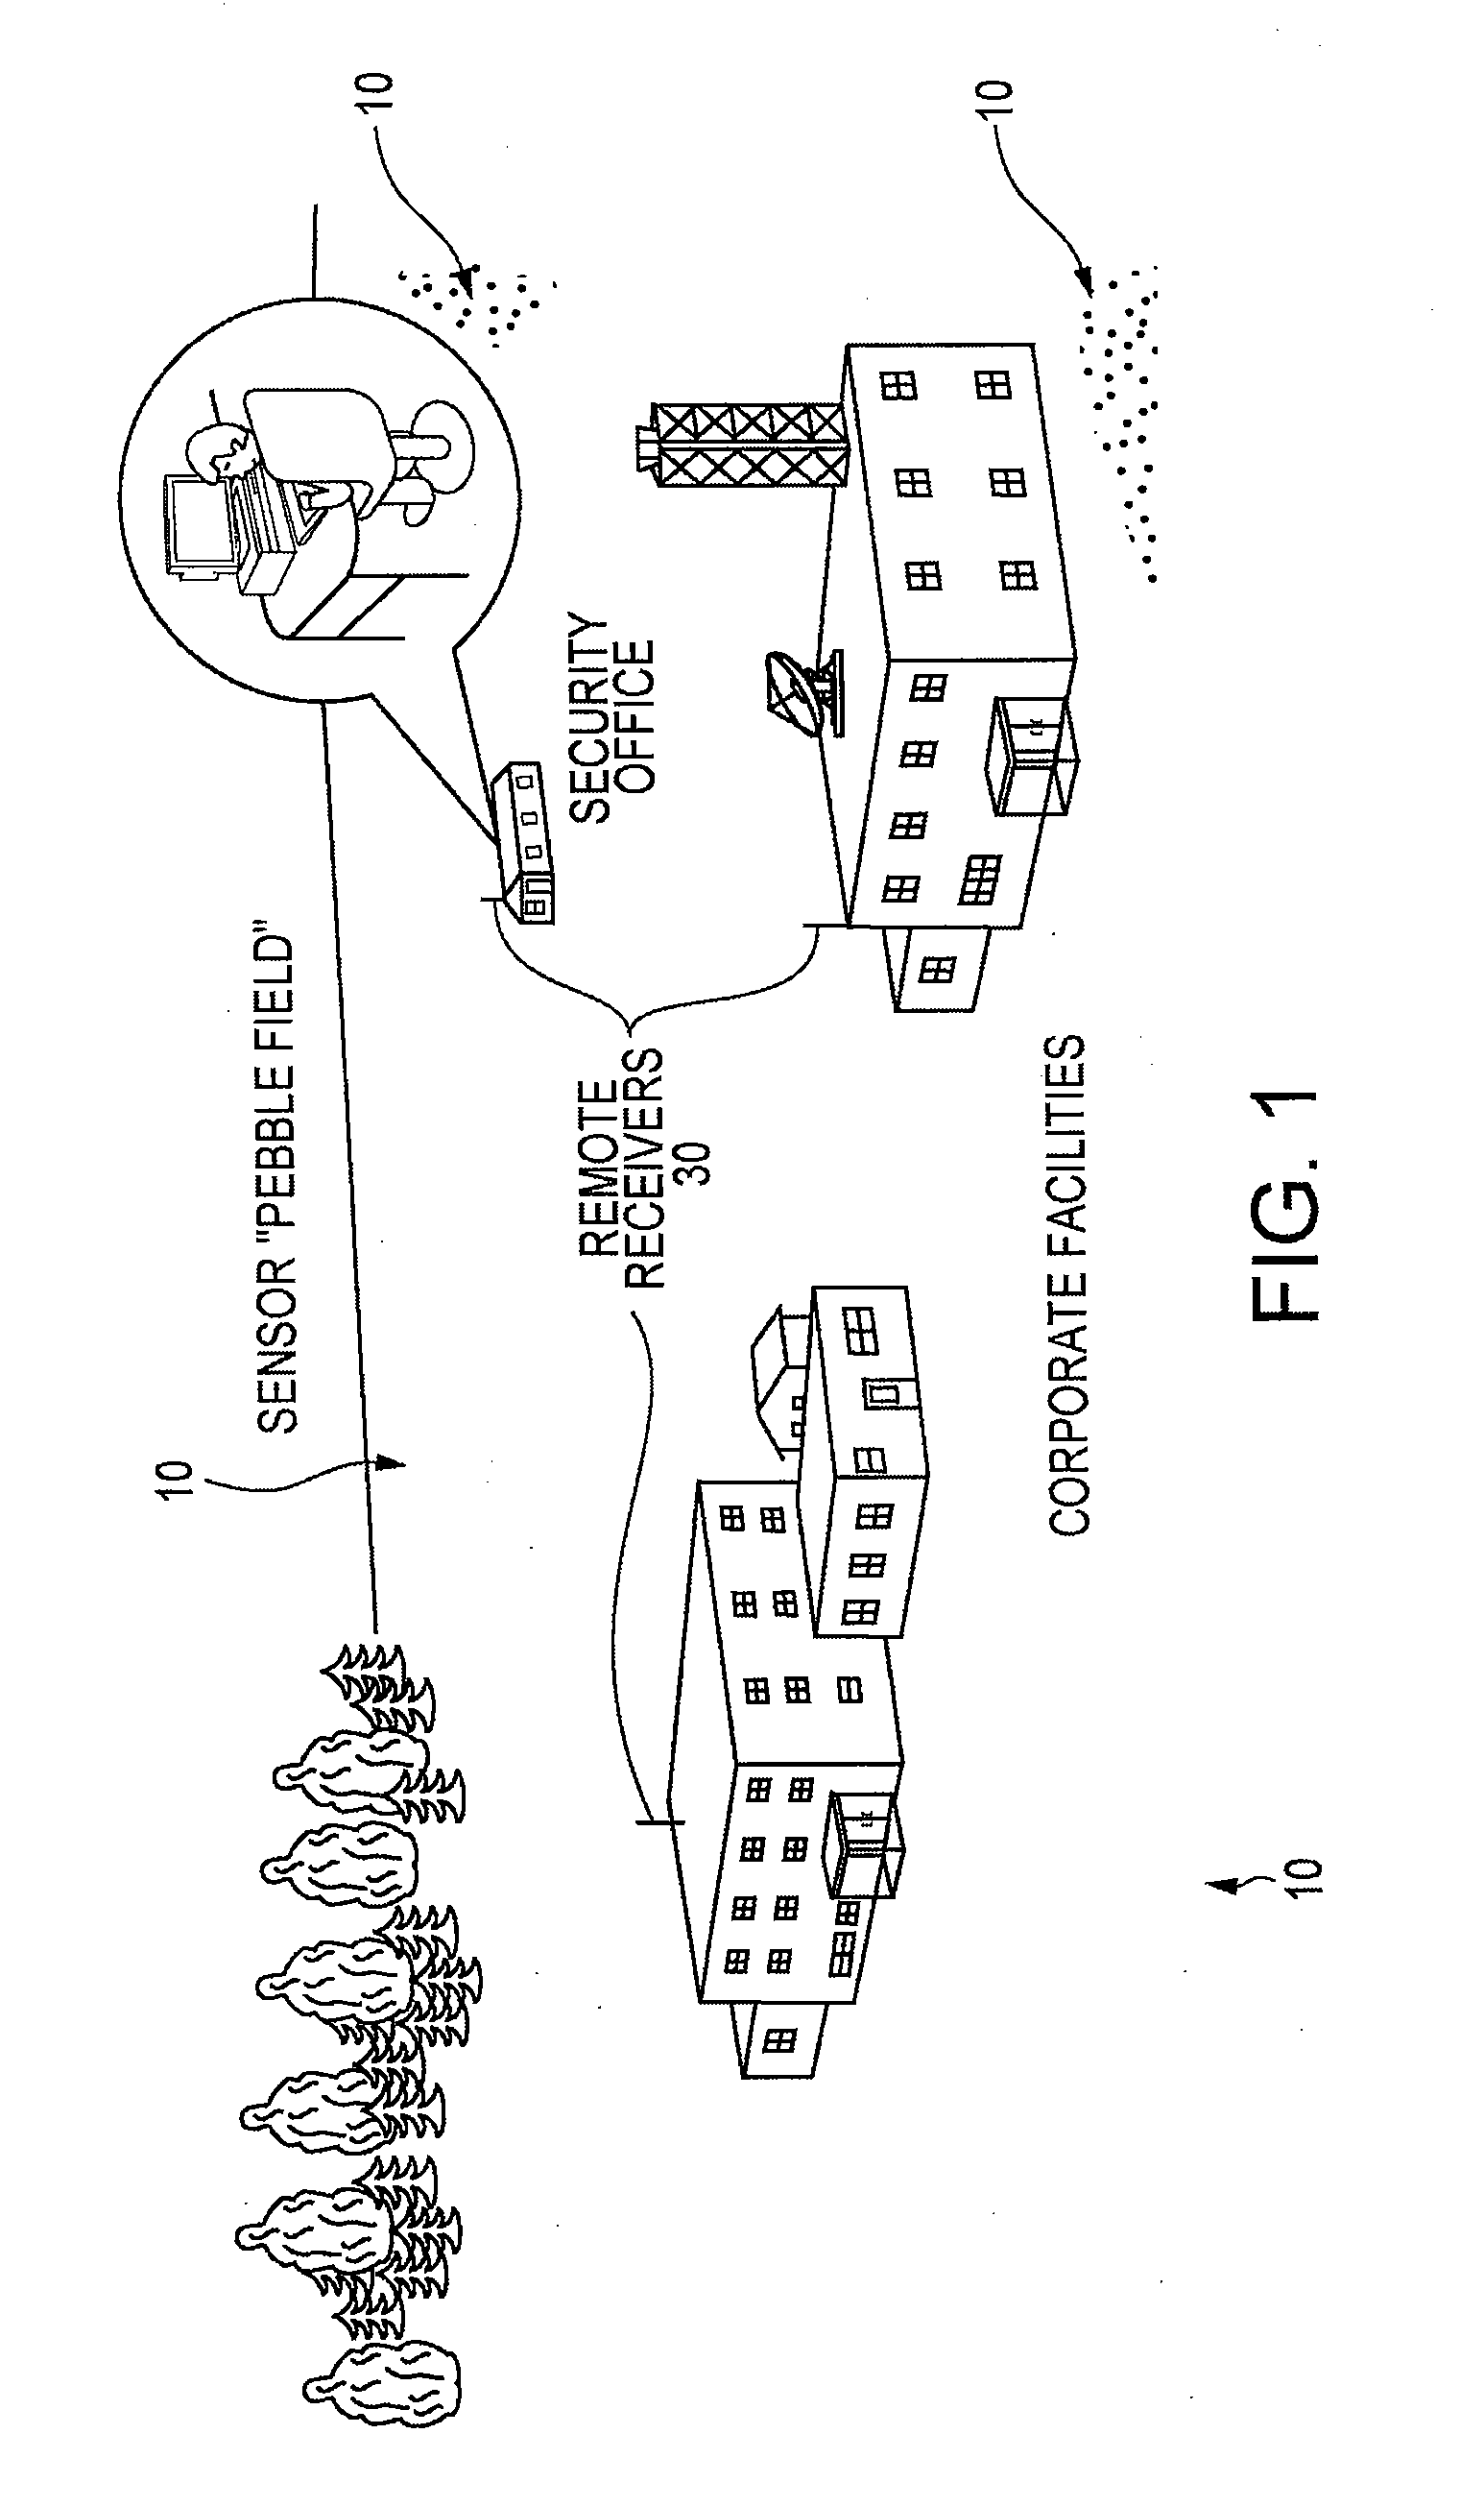 System and Methods for Monitoring Security Zones